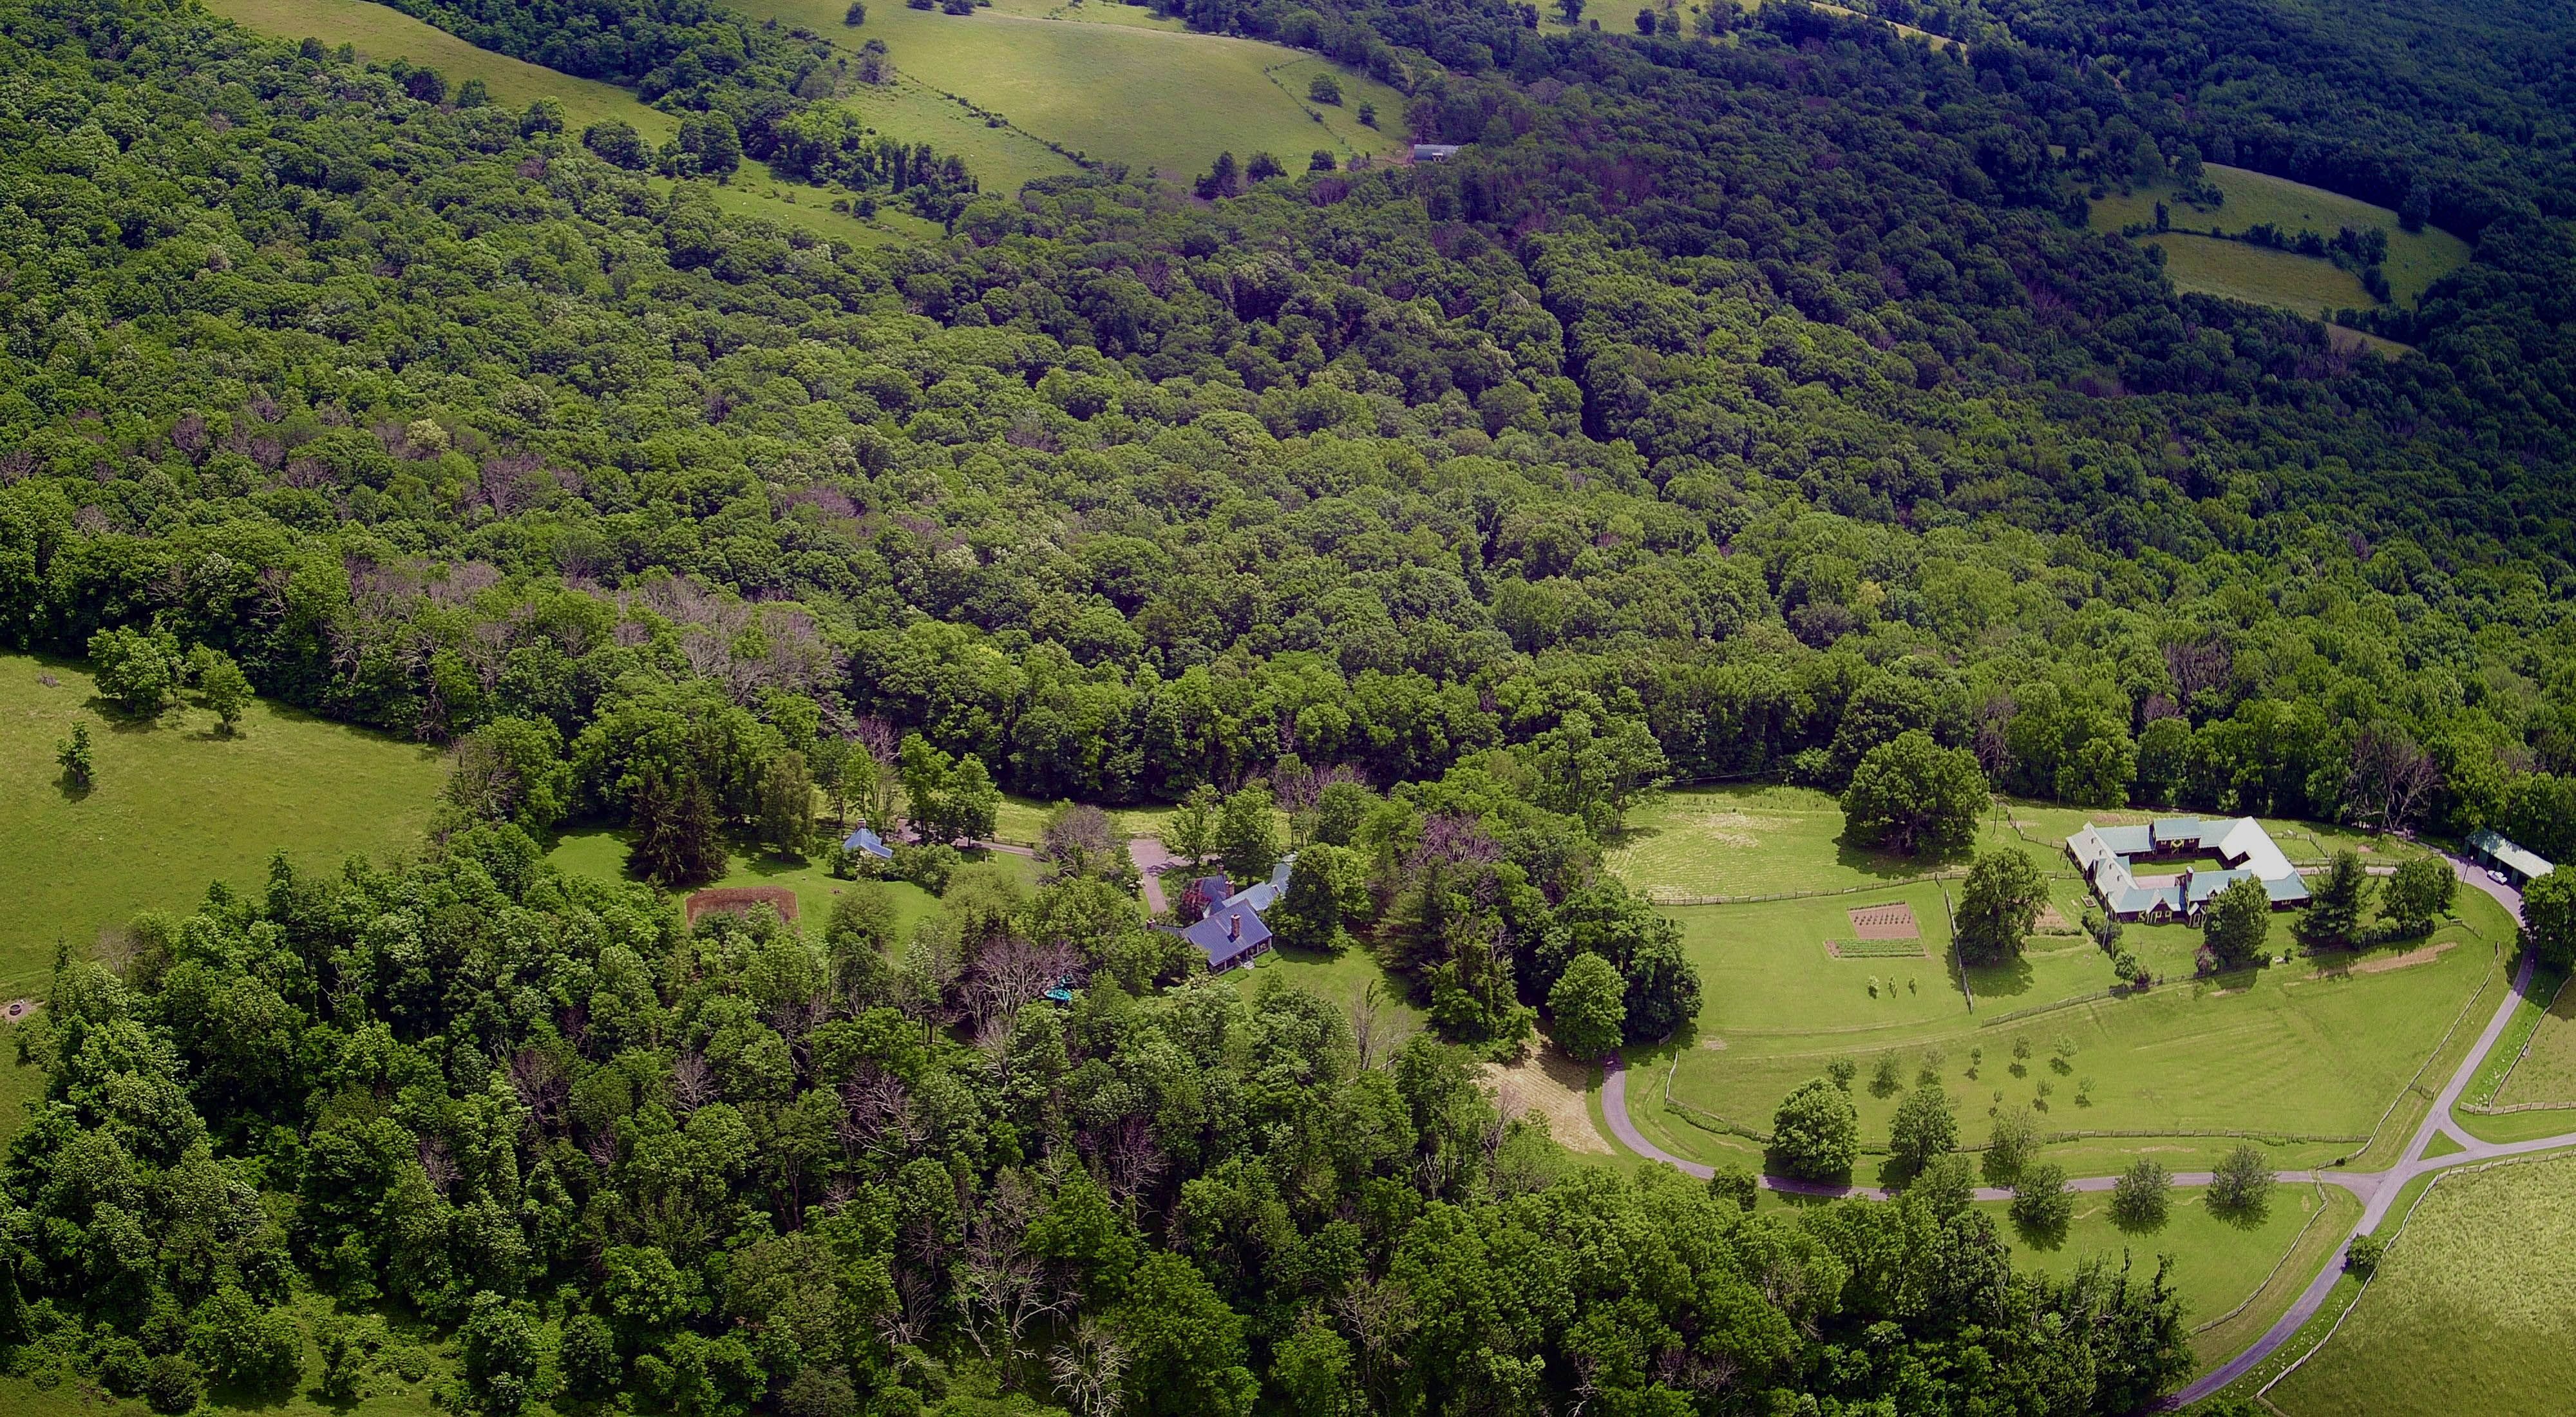 Aerial view of Hobby Horse Farm in the mountains of western Virginia.